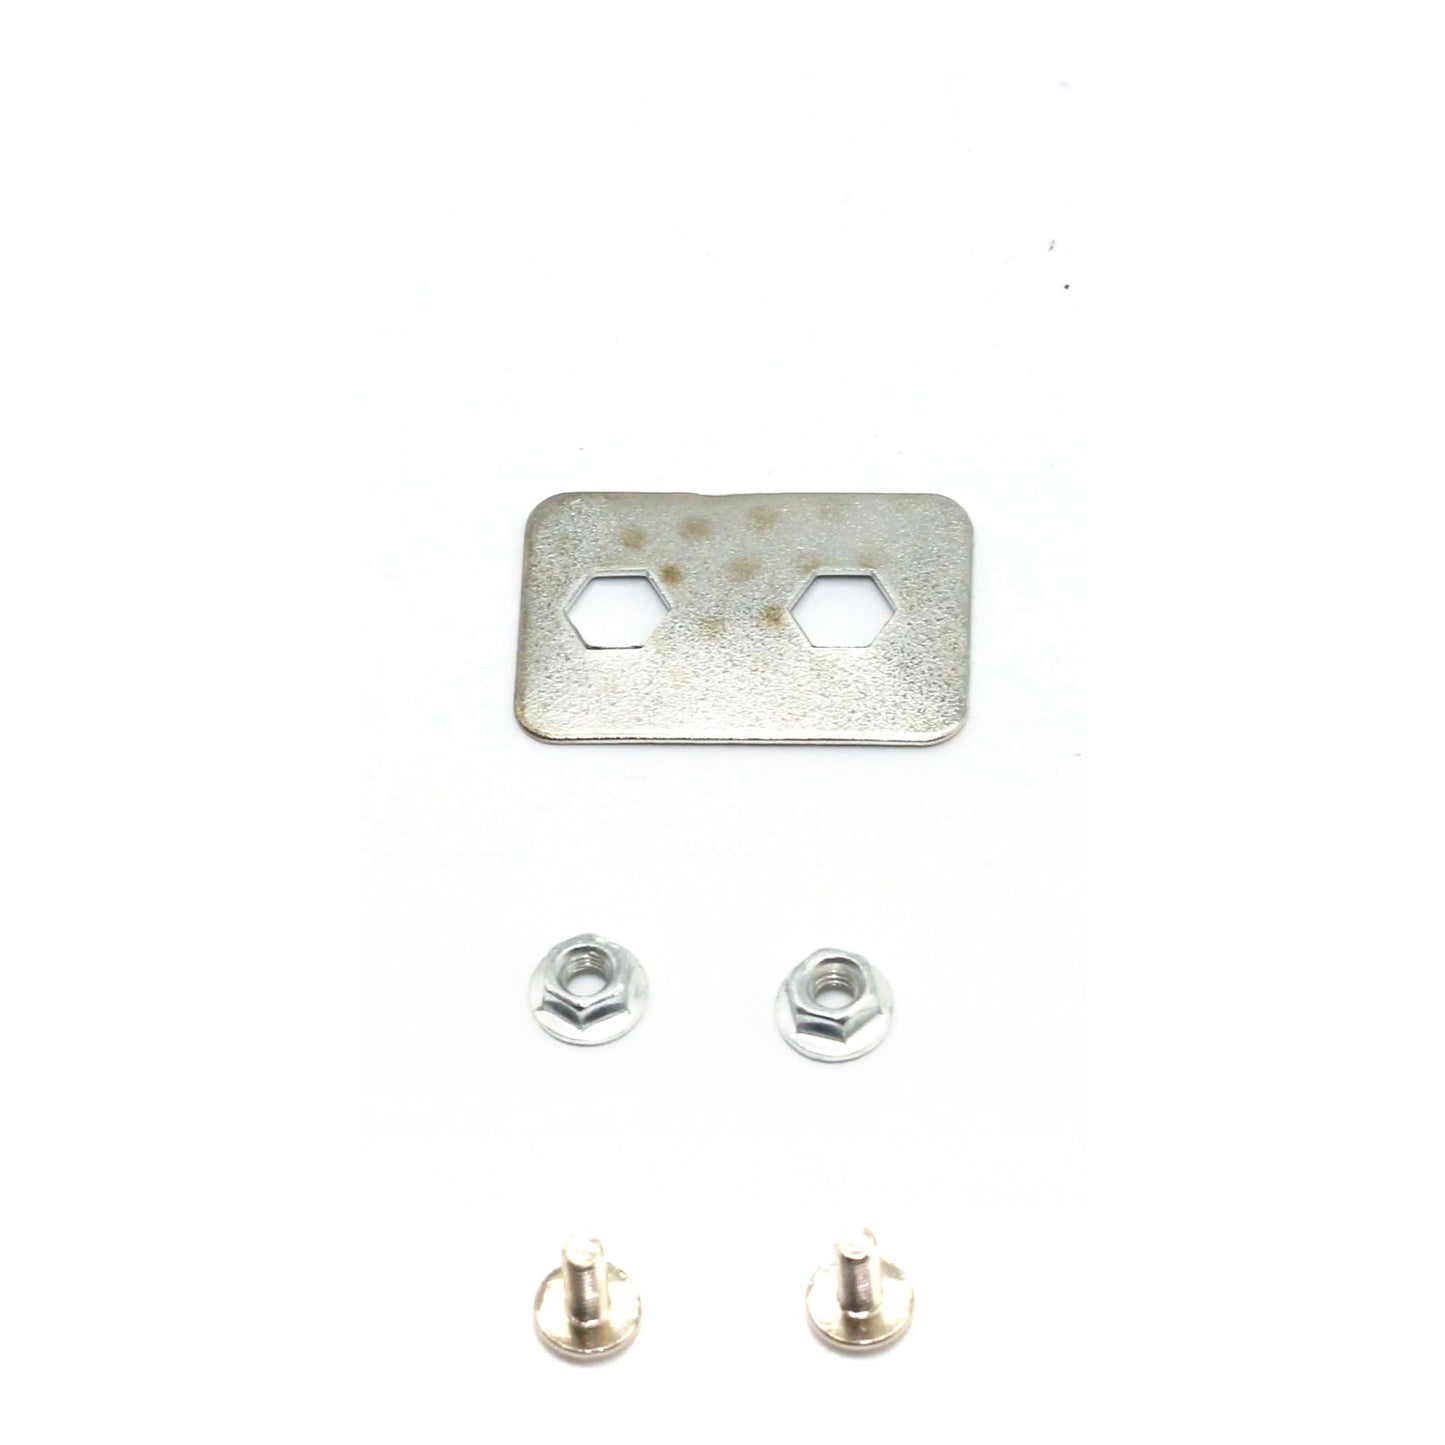 Replacement Handle Backings - Part NF1047